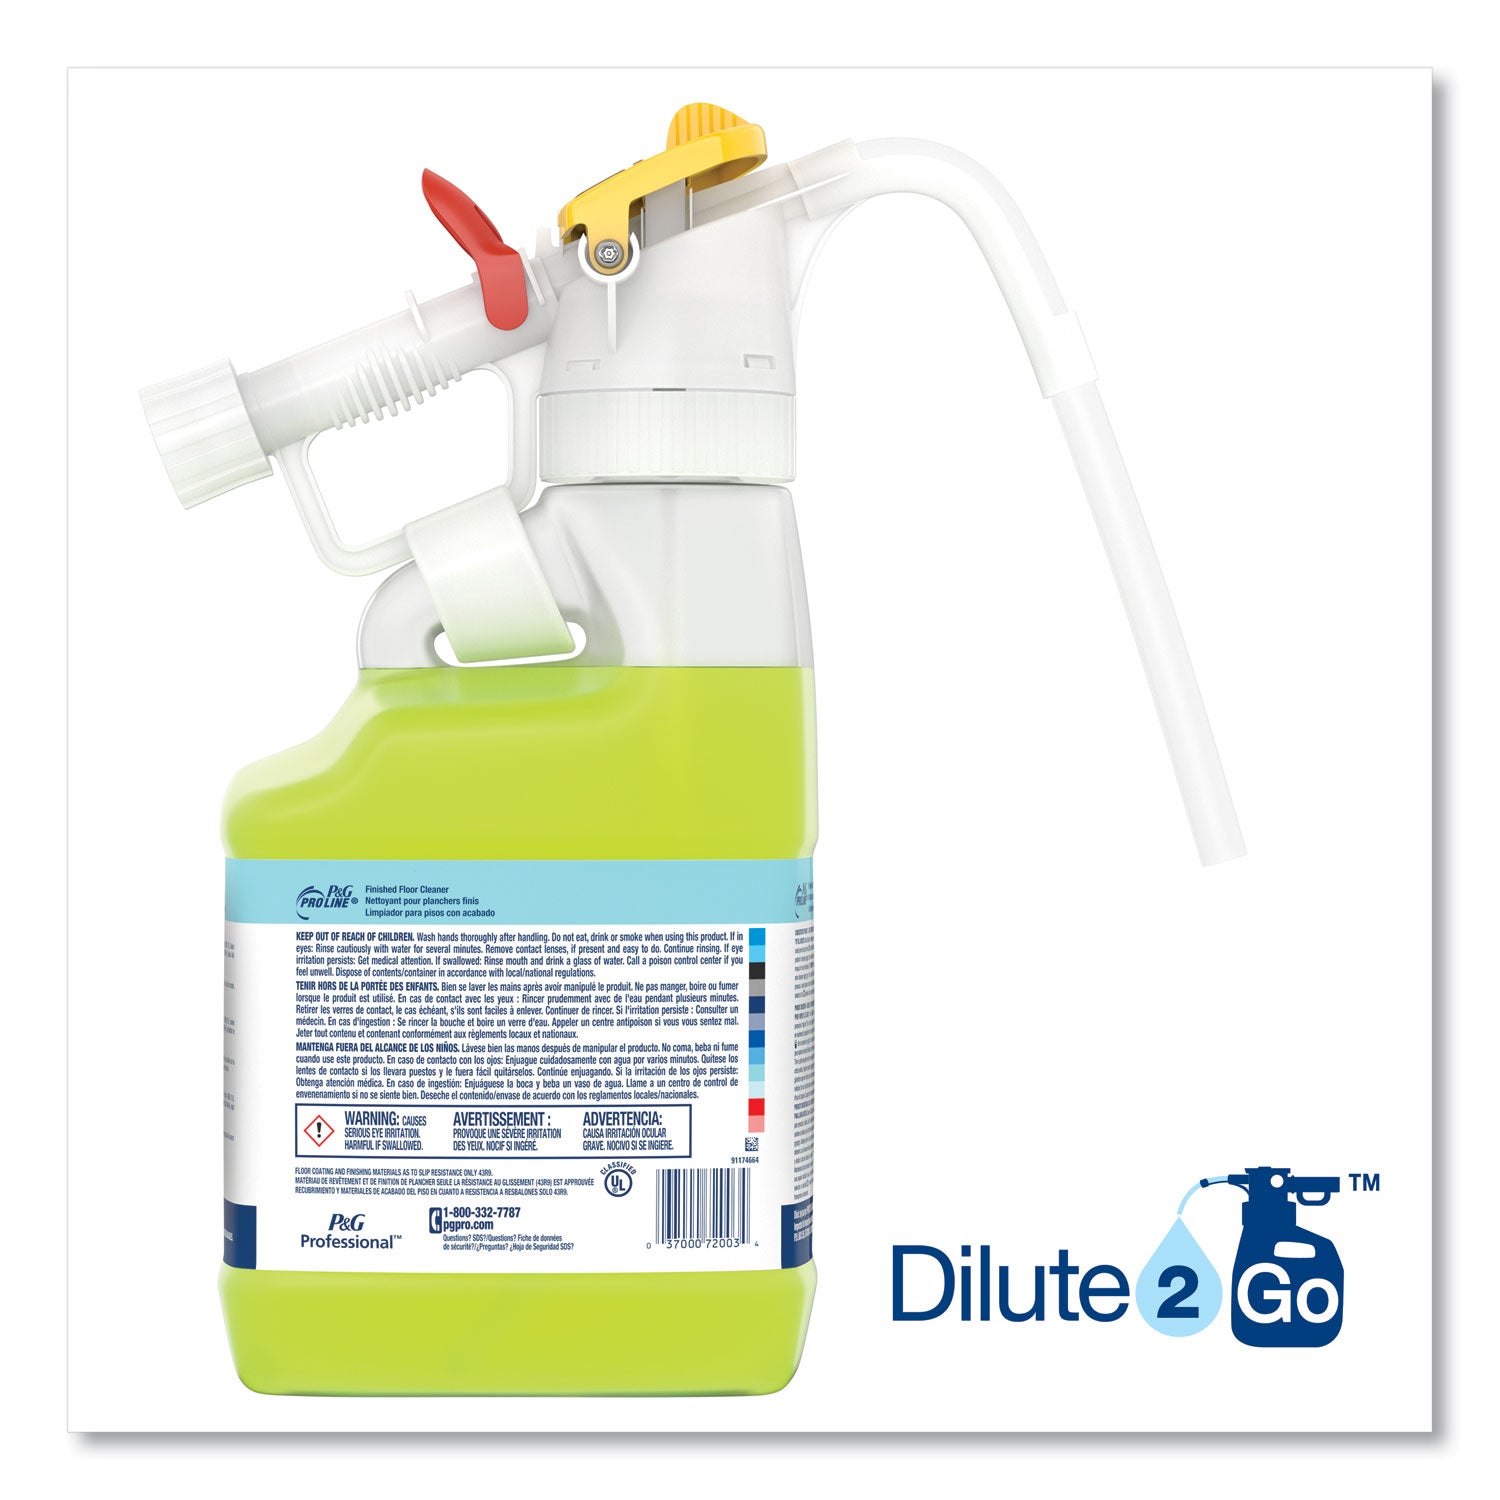 dilute-2-go-p-and-g-pro-line-finished-floor-cleaner-fresh-scent-45-l-jug-1-carton_pgc72003 - 3